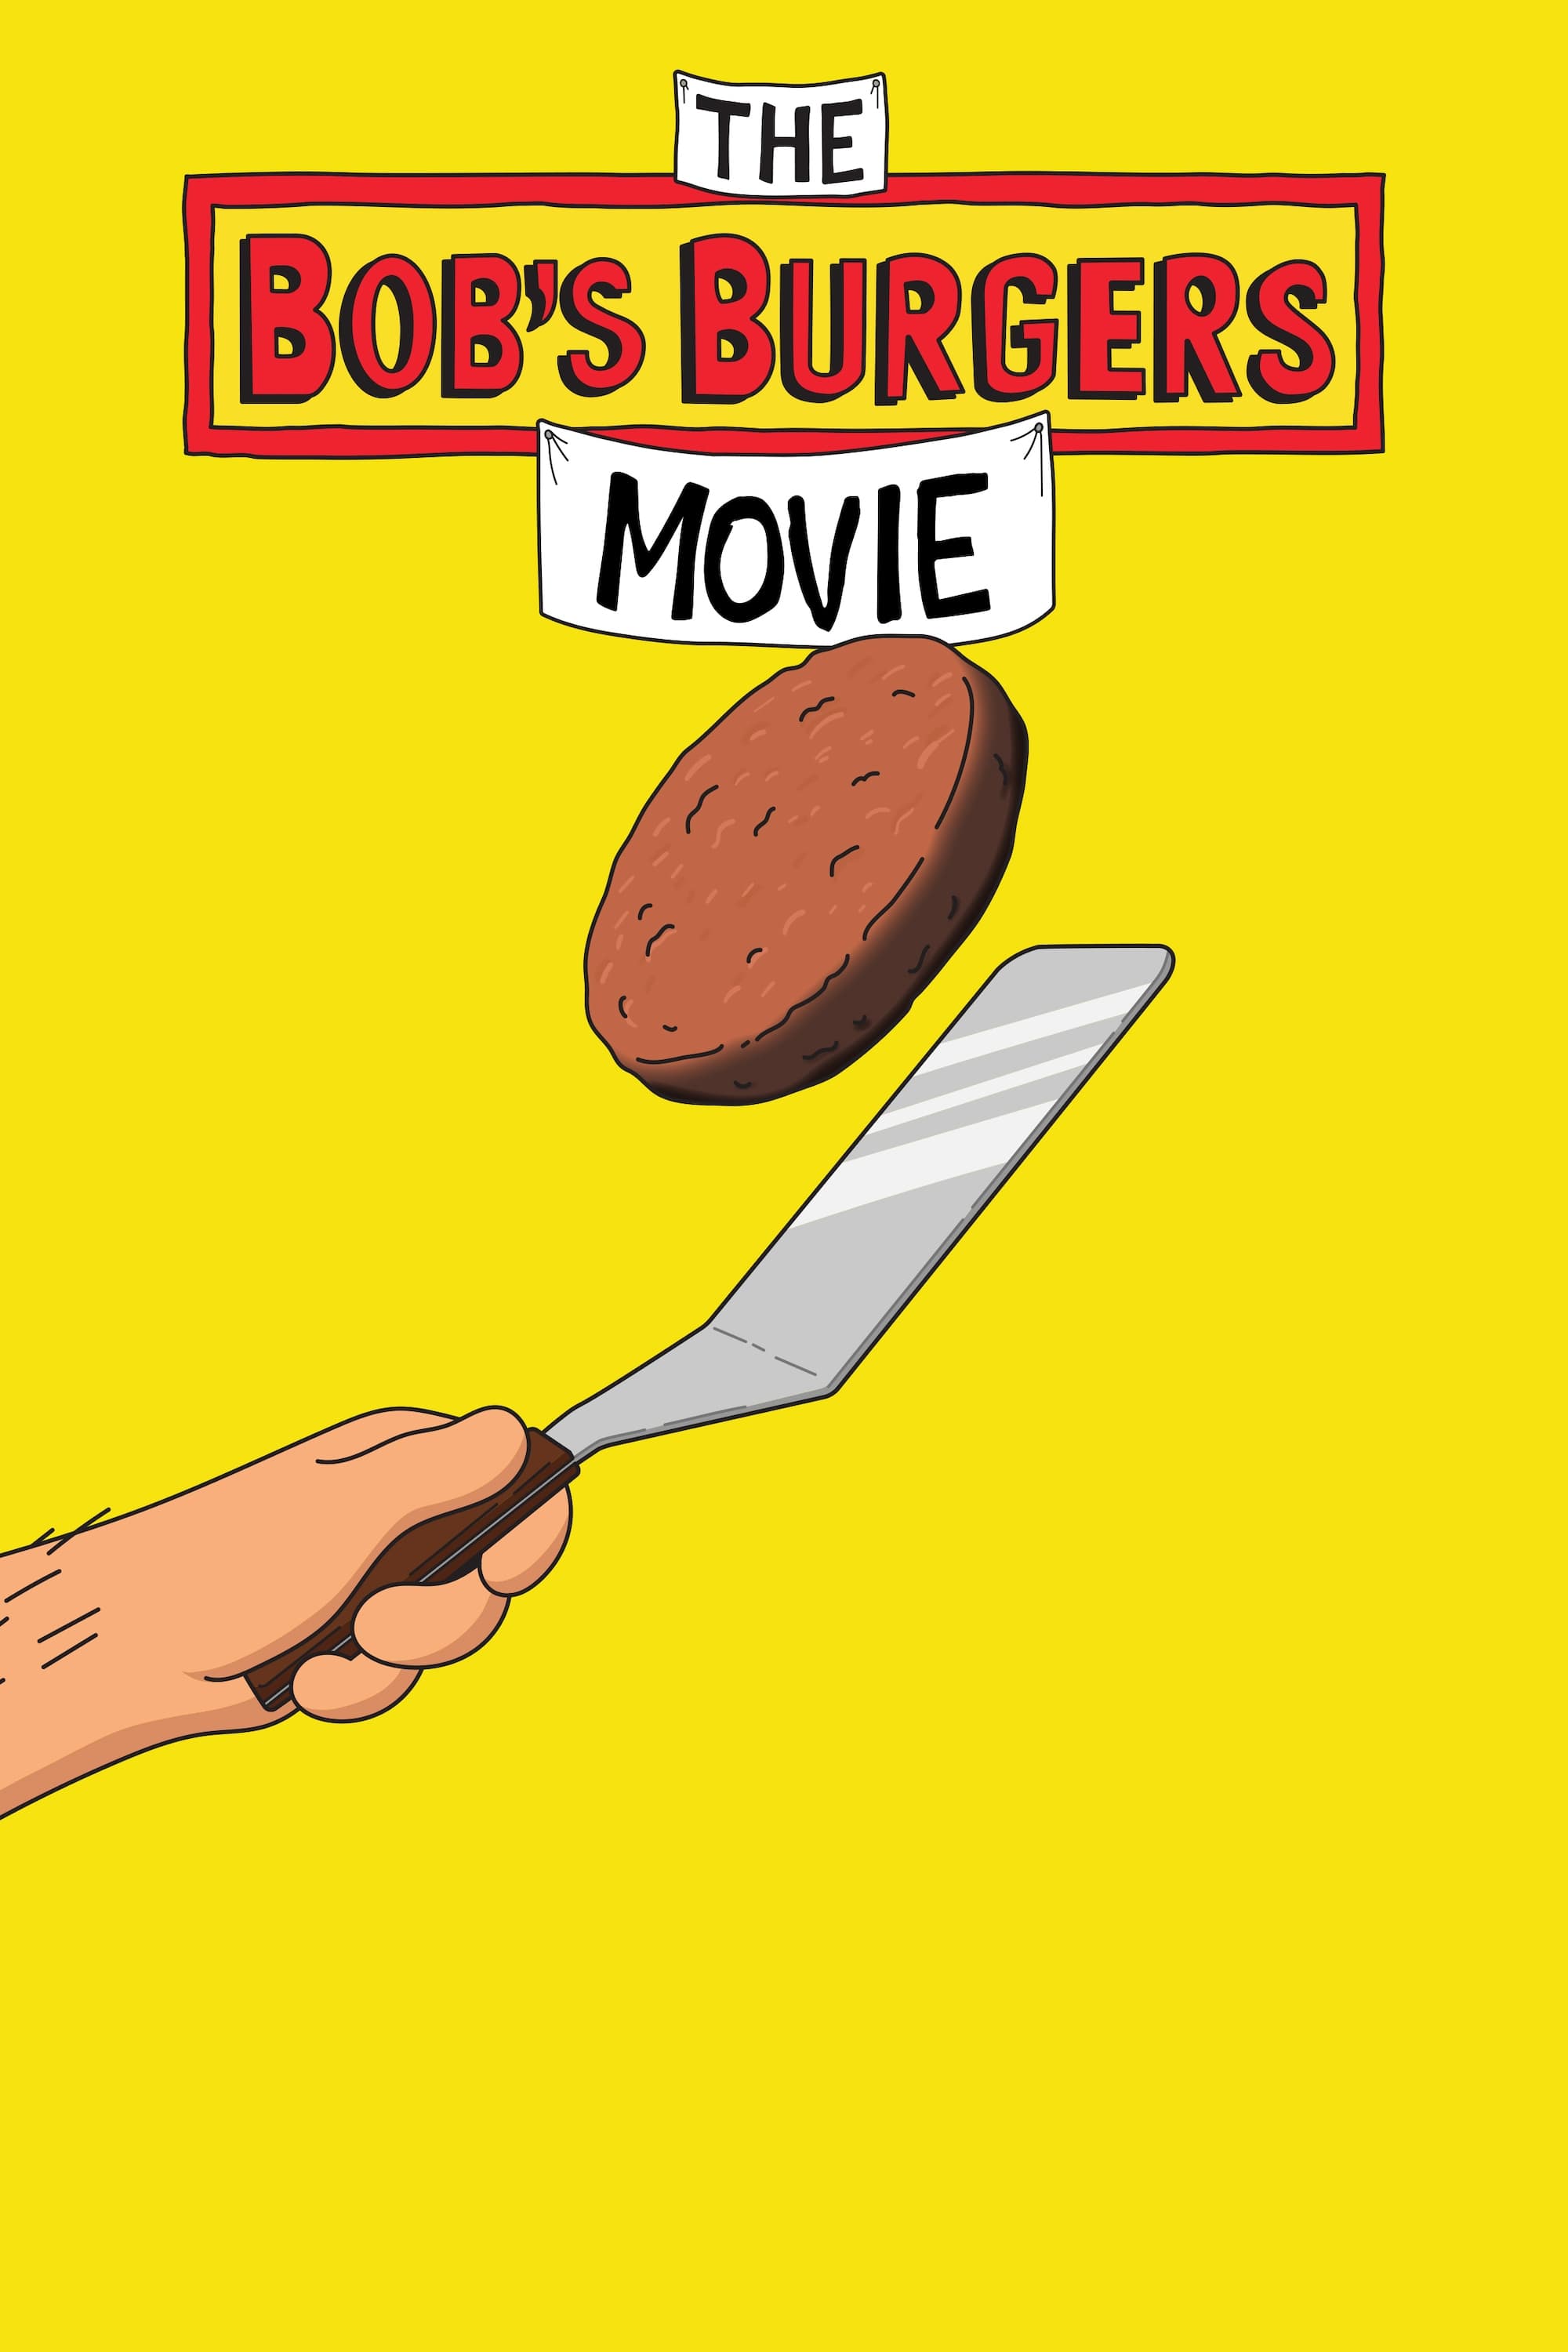 Poster for the movie "The Bob's Burgers Movie"